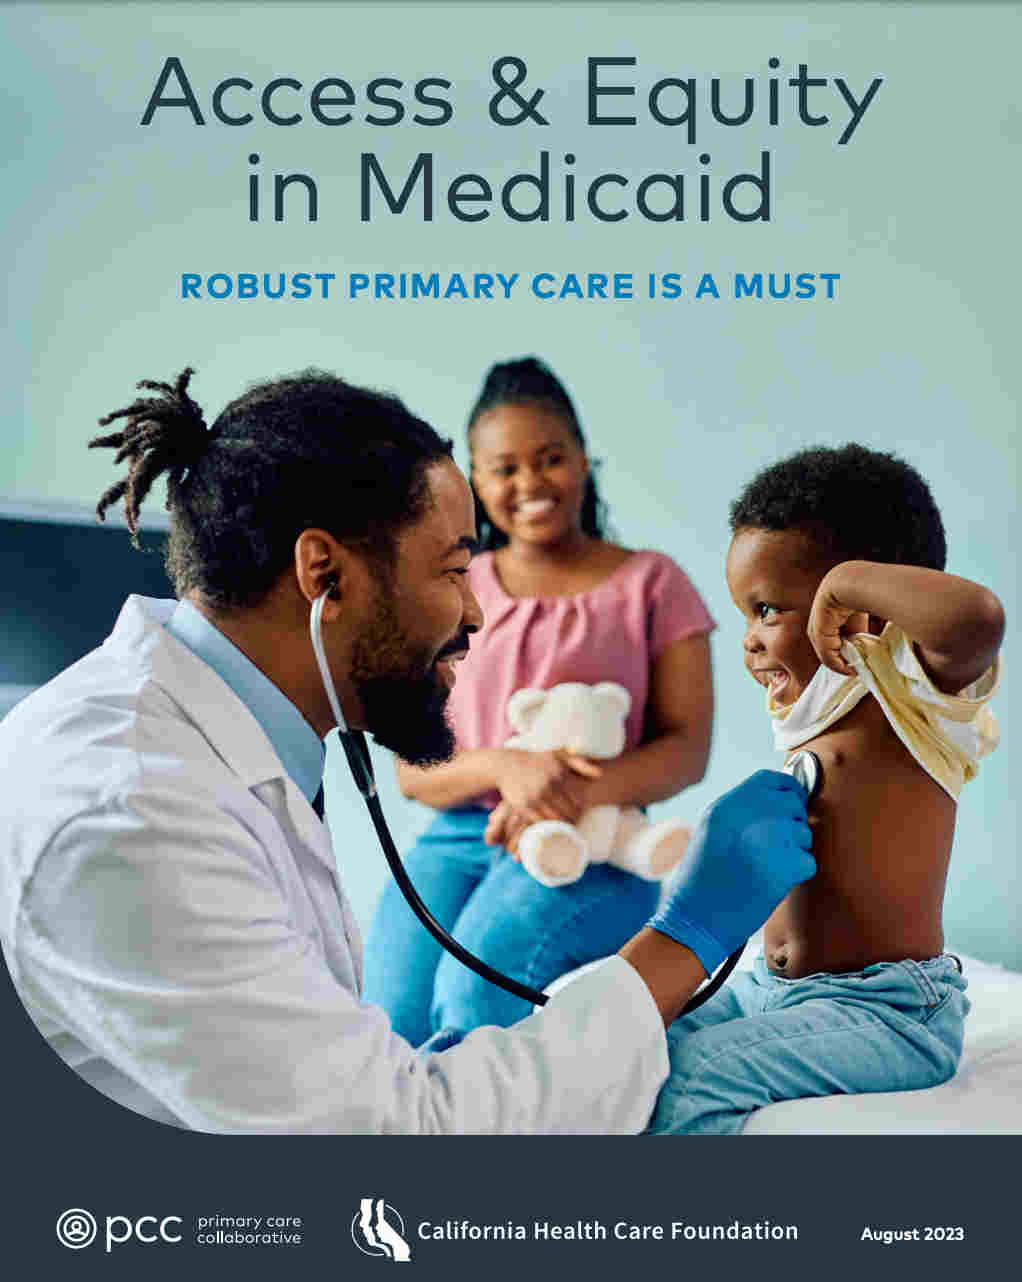 Primary Care Collaborative: Medicaid is key lever to improving physician pay, patient outcomes, health equity